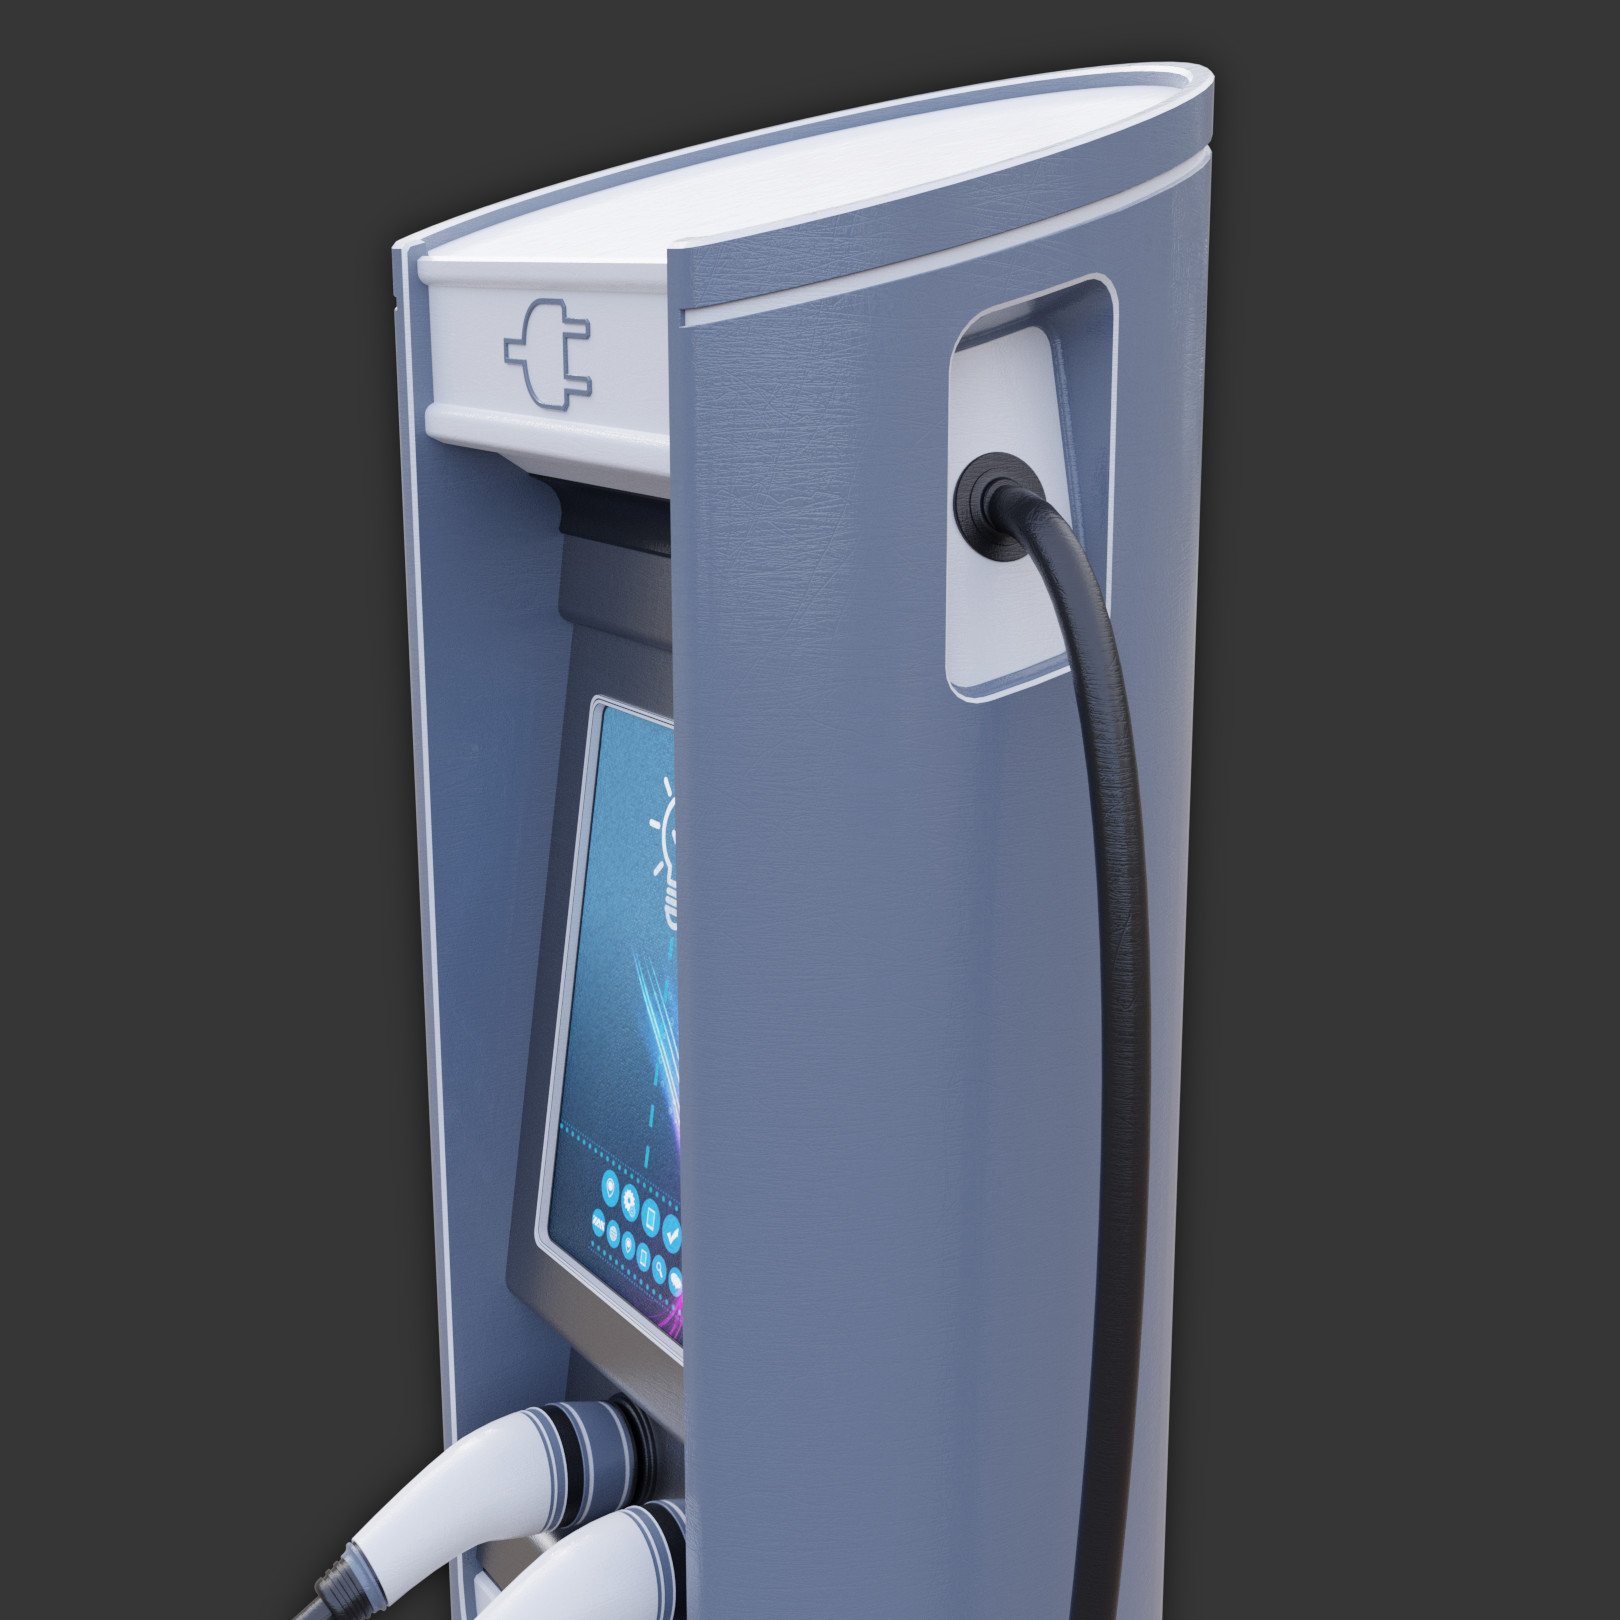 juicebox electric car charger